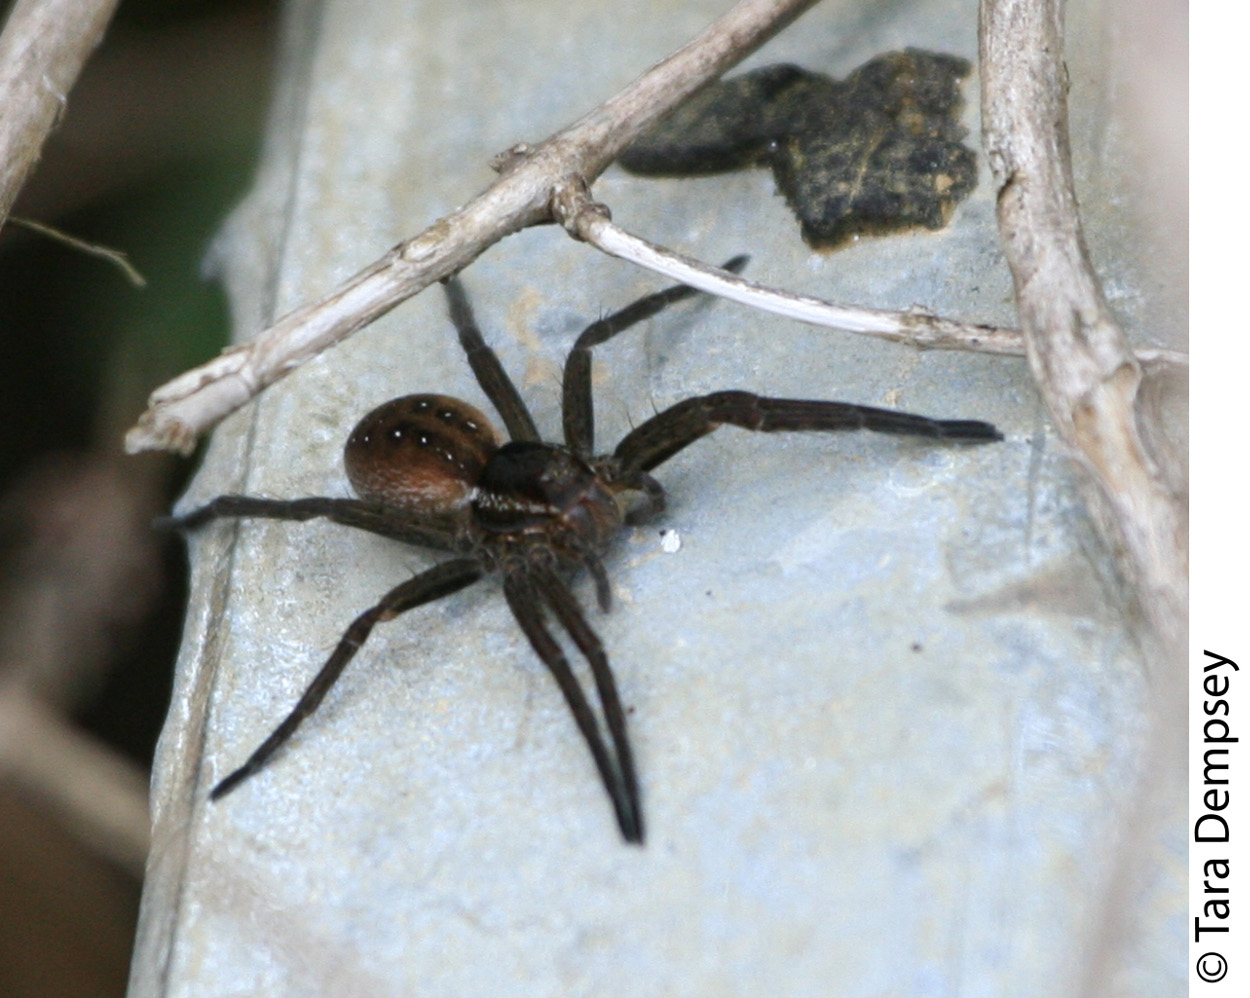 Dolomedes fimbriatus from the New Forest with atypically feint lateral bands